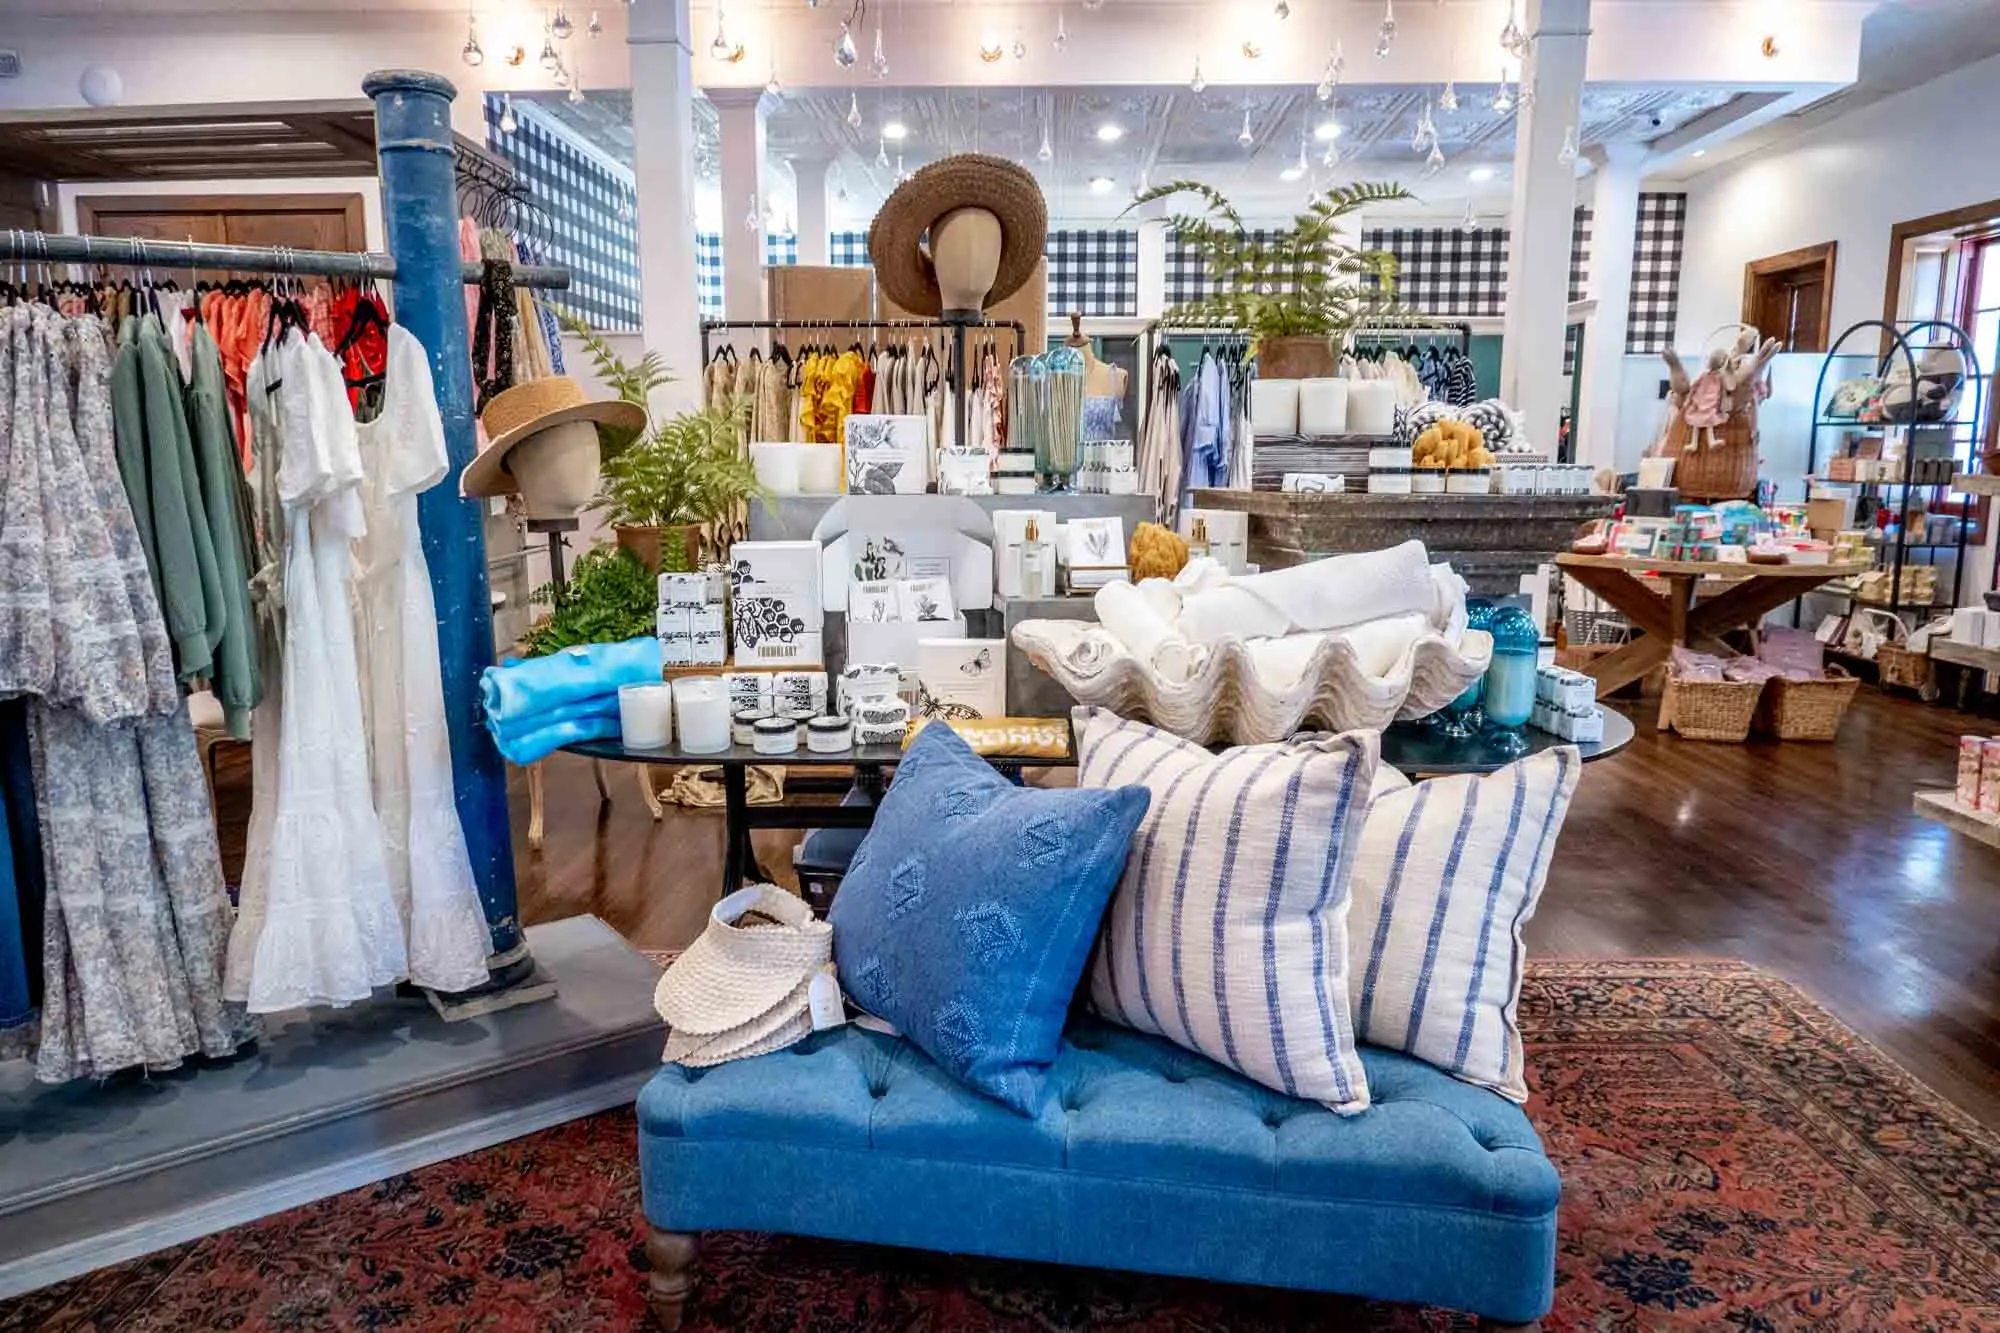 Dresses, pillows, and homegoods for sale in a boutique.